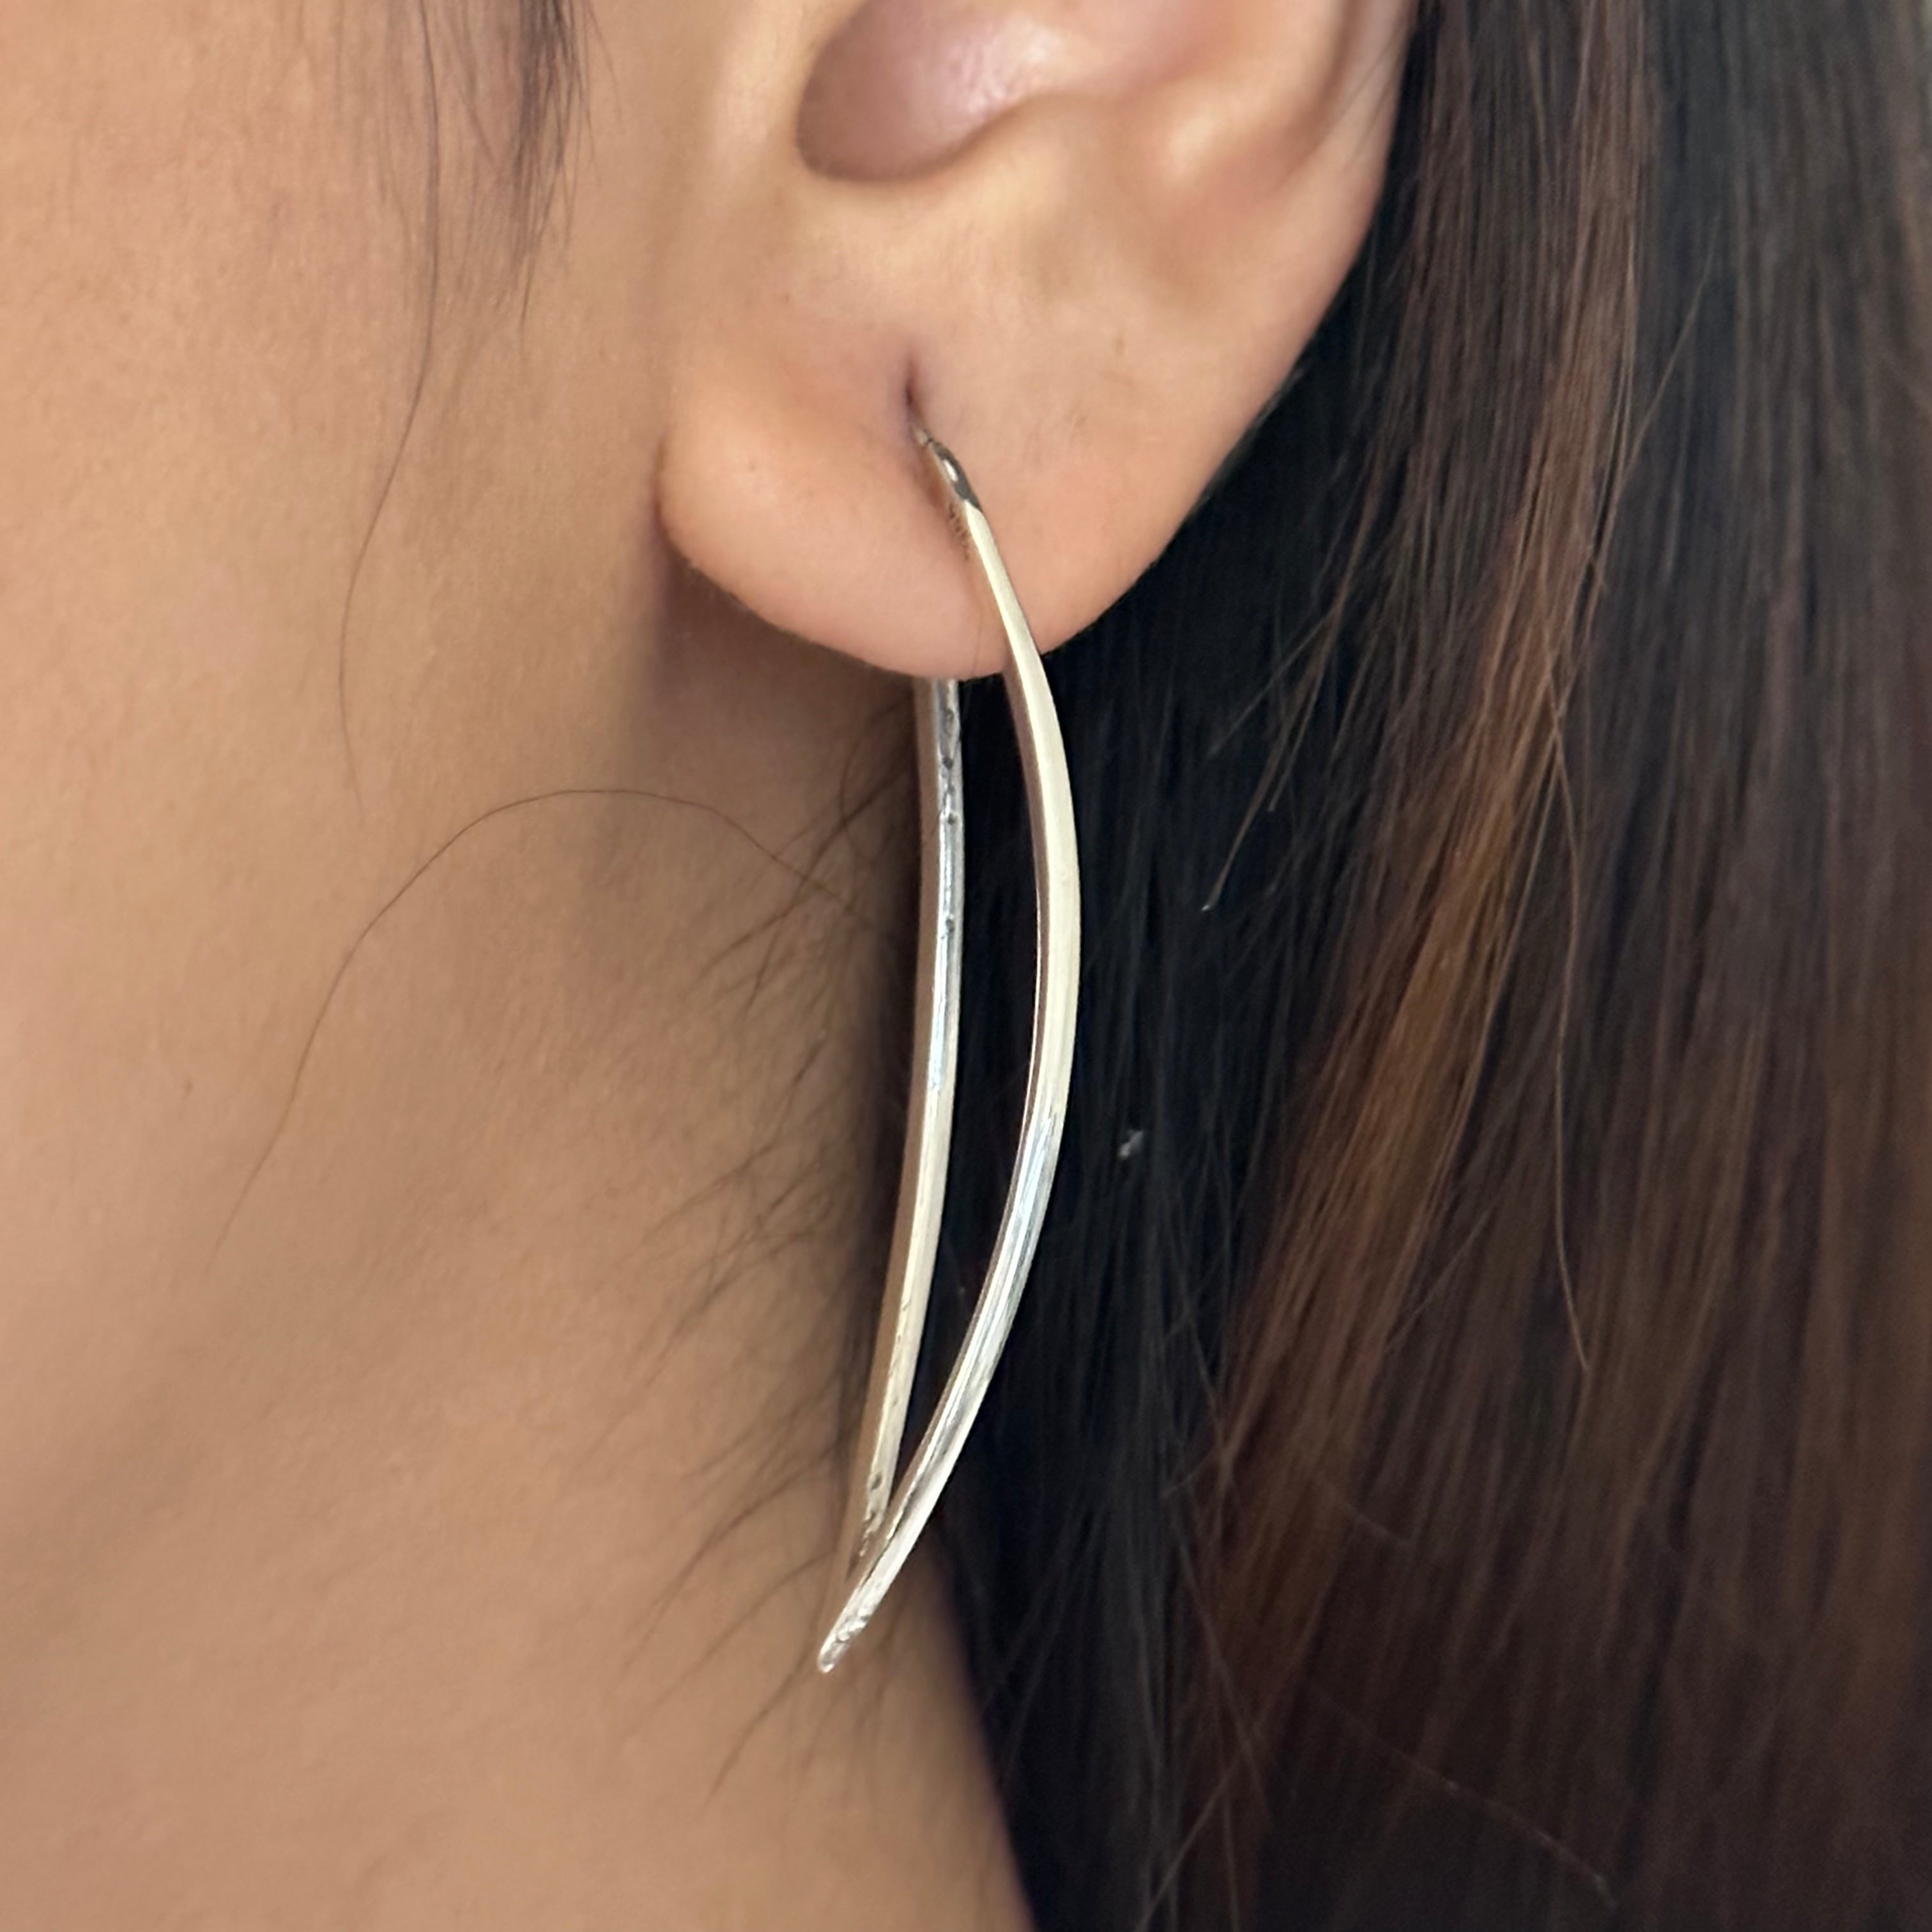 Curved Sterling Silver Hoops in a Leaf Like Shape